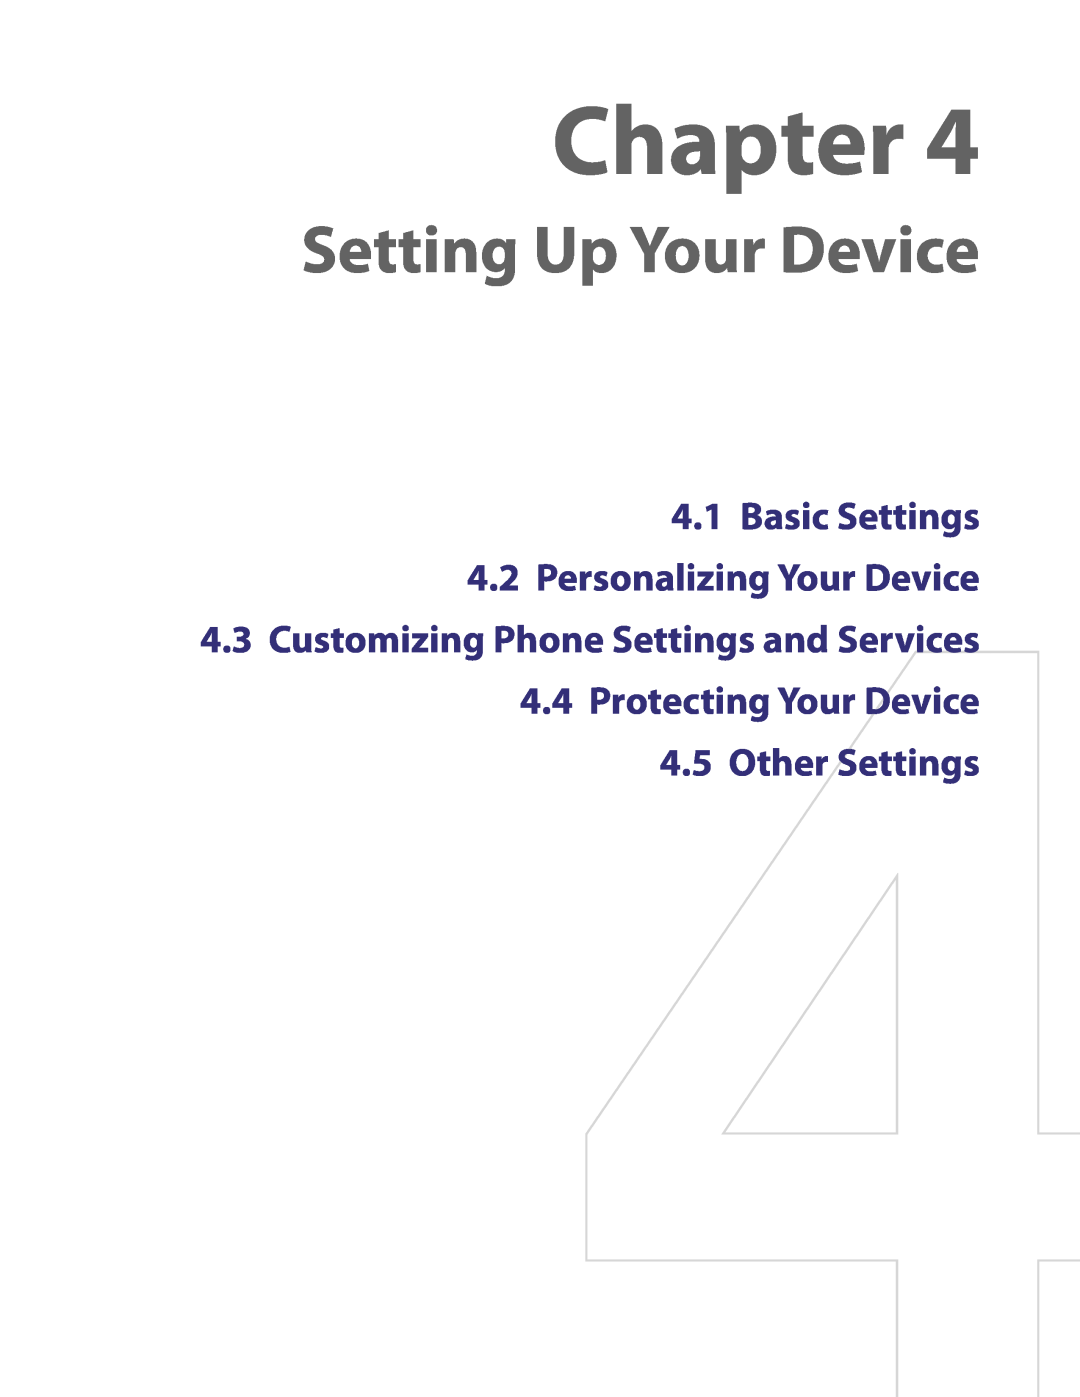 HTC PDA Phone user manual Setting Up Your Device, Basic Settings 4.2 Personalizing Your Device, Chapter 